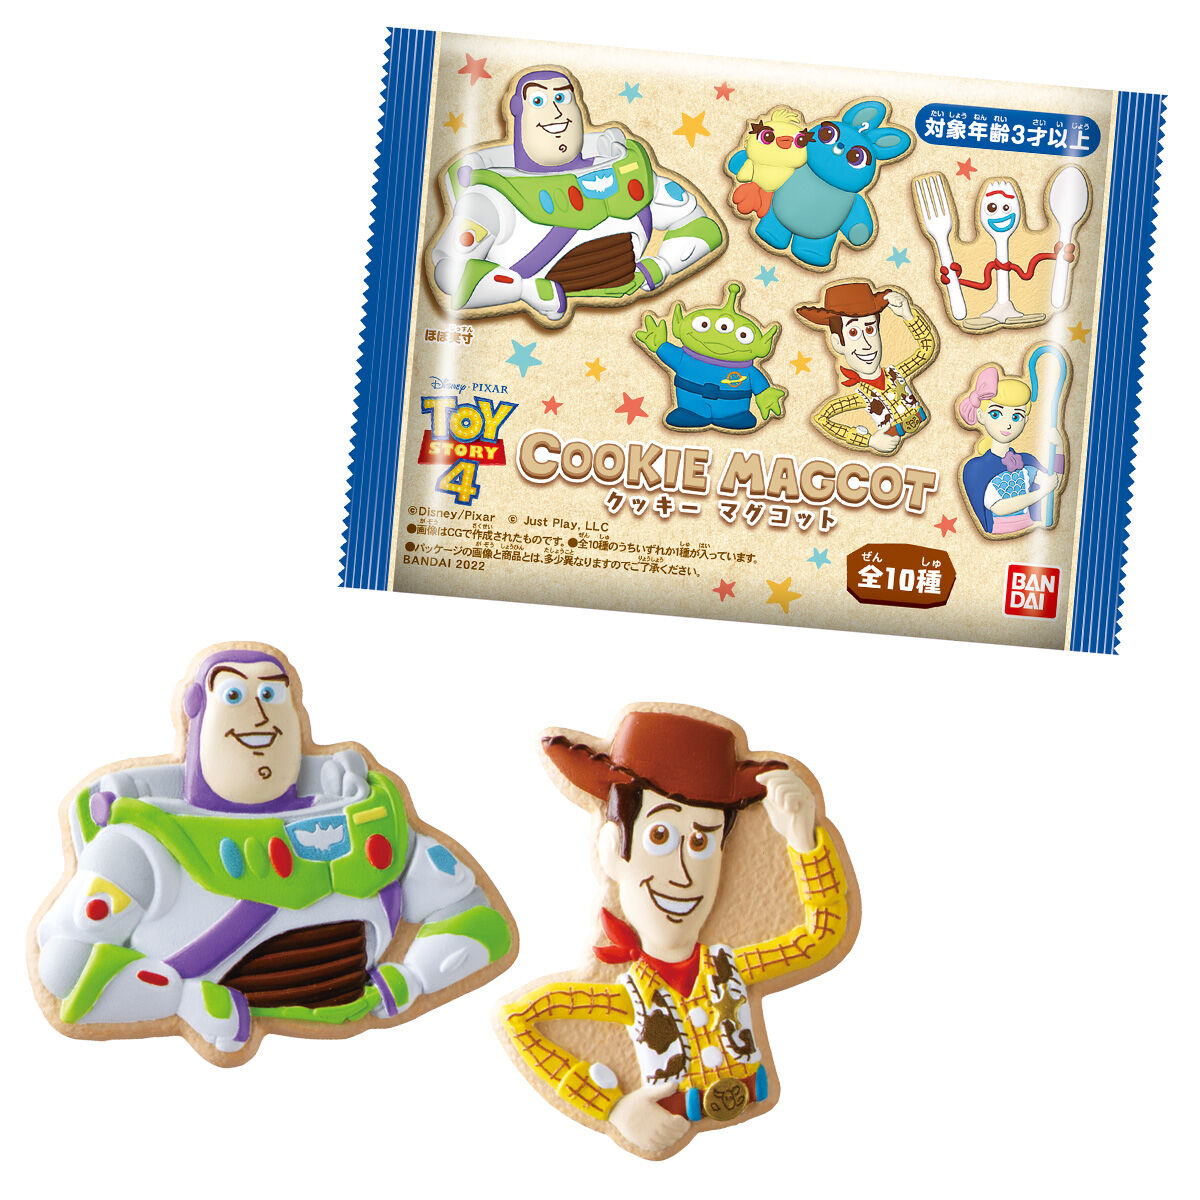 TOY STORY 4 / COOKIE MAGCOT_0